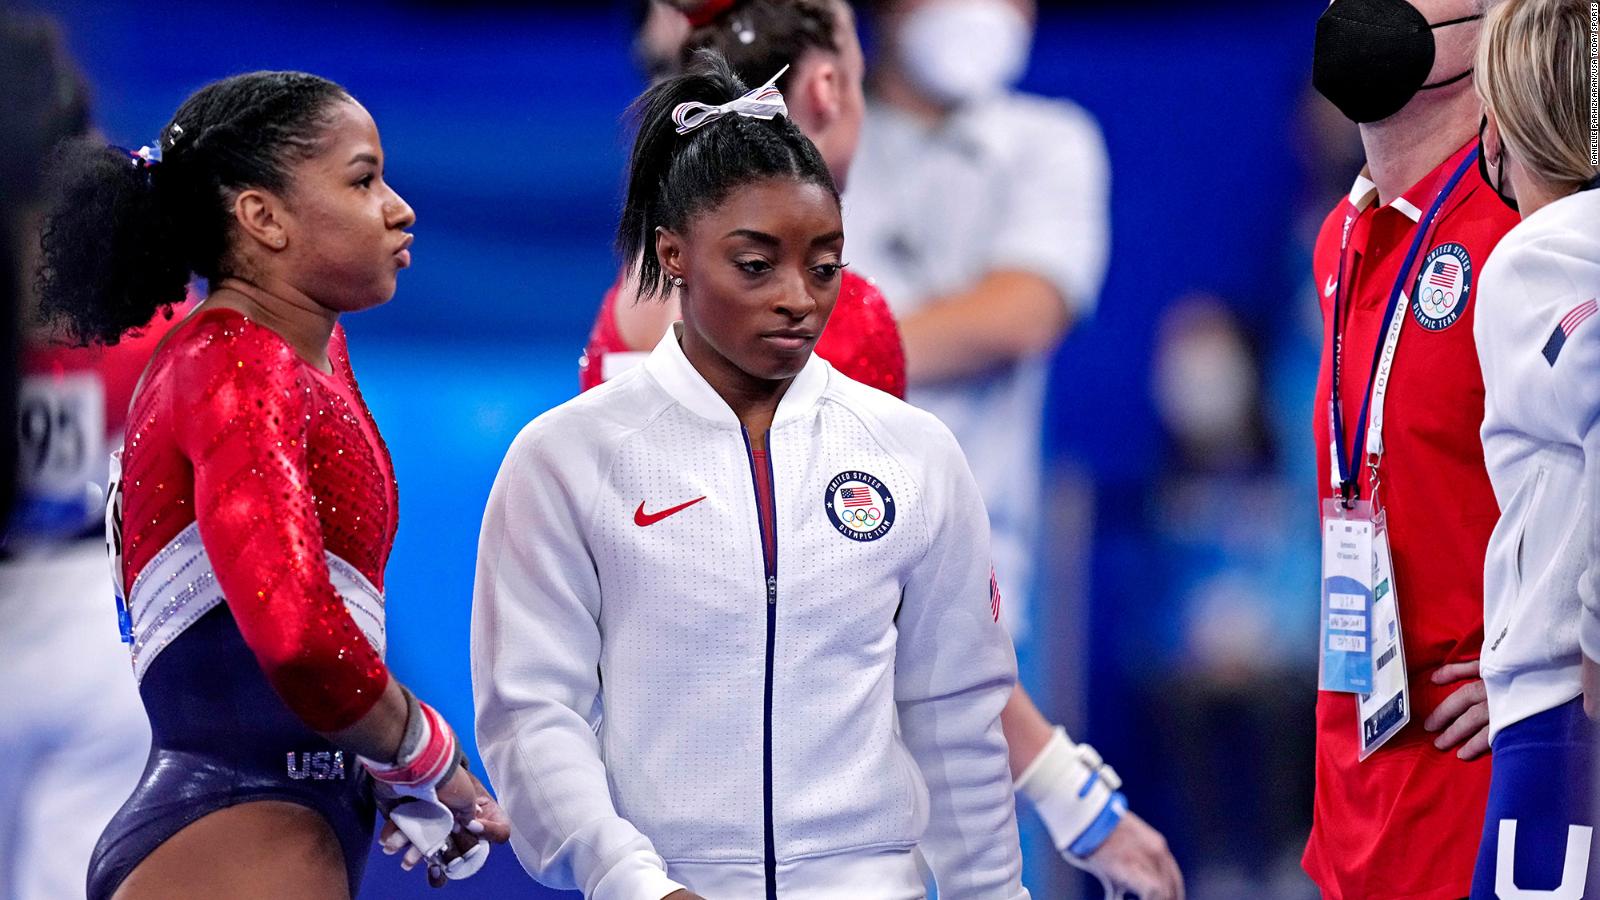 Jordan Chiles Stepped In For Team Usa After Her Friend And Confidante Simone Biles Withdrew Cnn